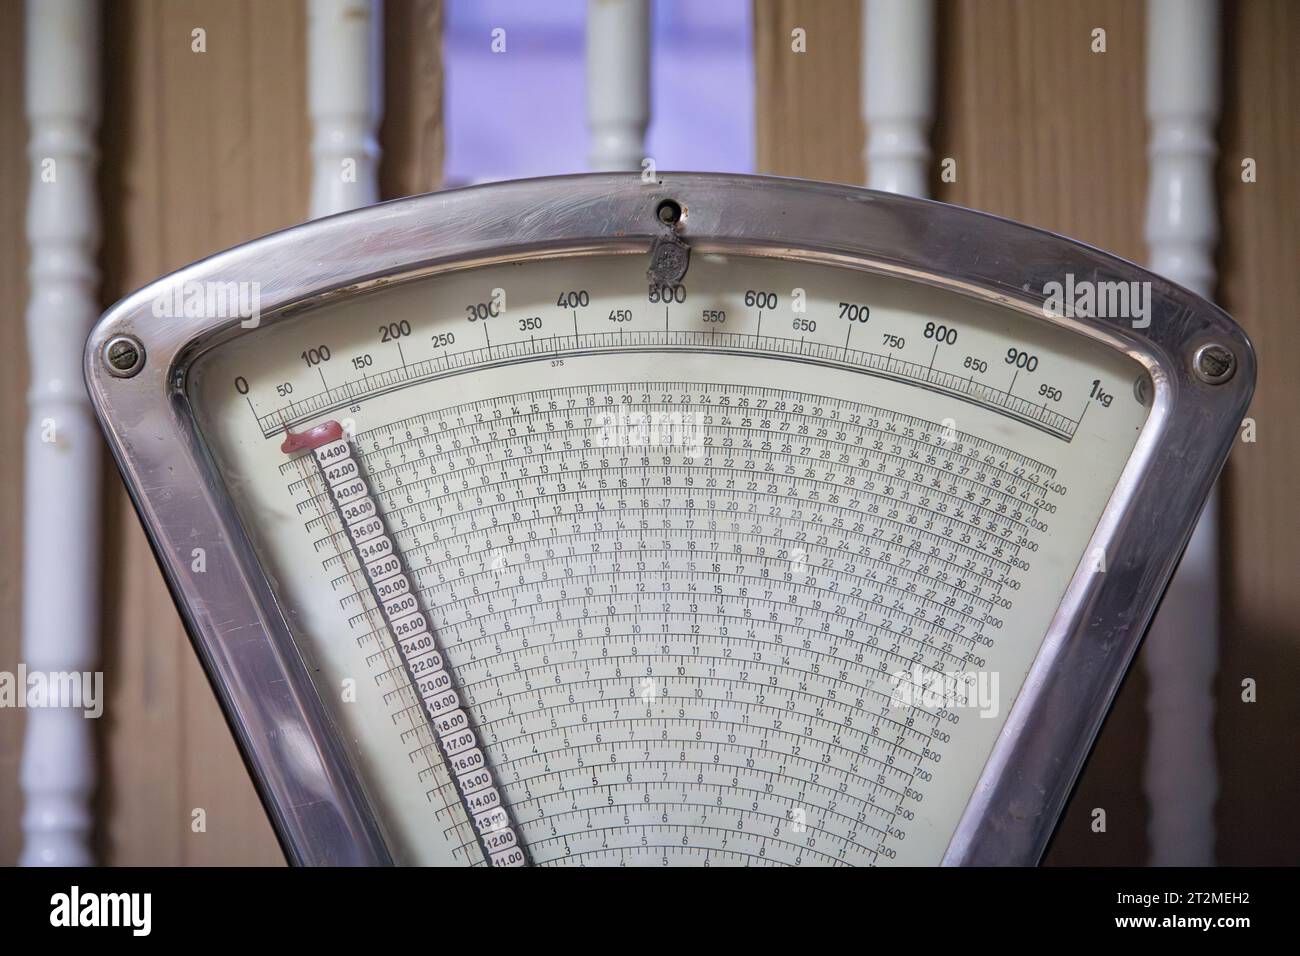 https://c8.alamy.com/comp/2T2MEH2/detail-of-an-old-grocery-scale-product-weighing-equipment-close-up-2T2MEH2.jpg